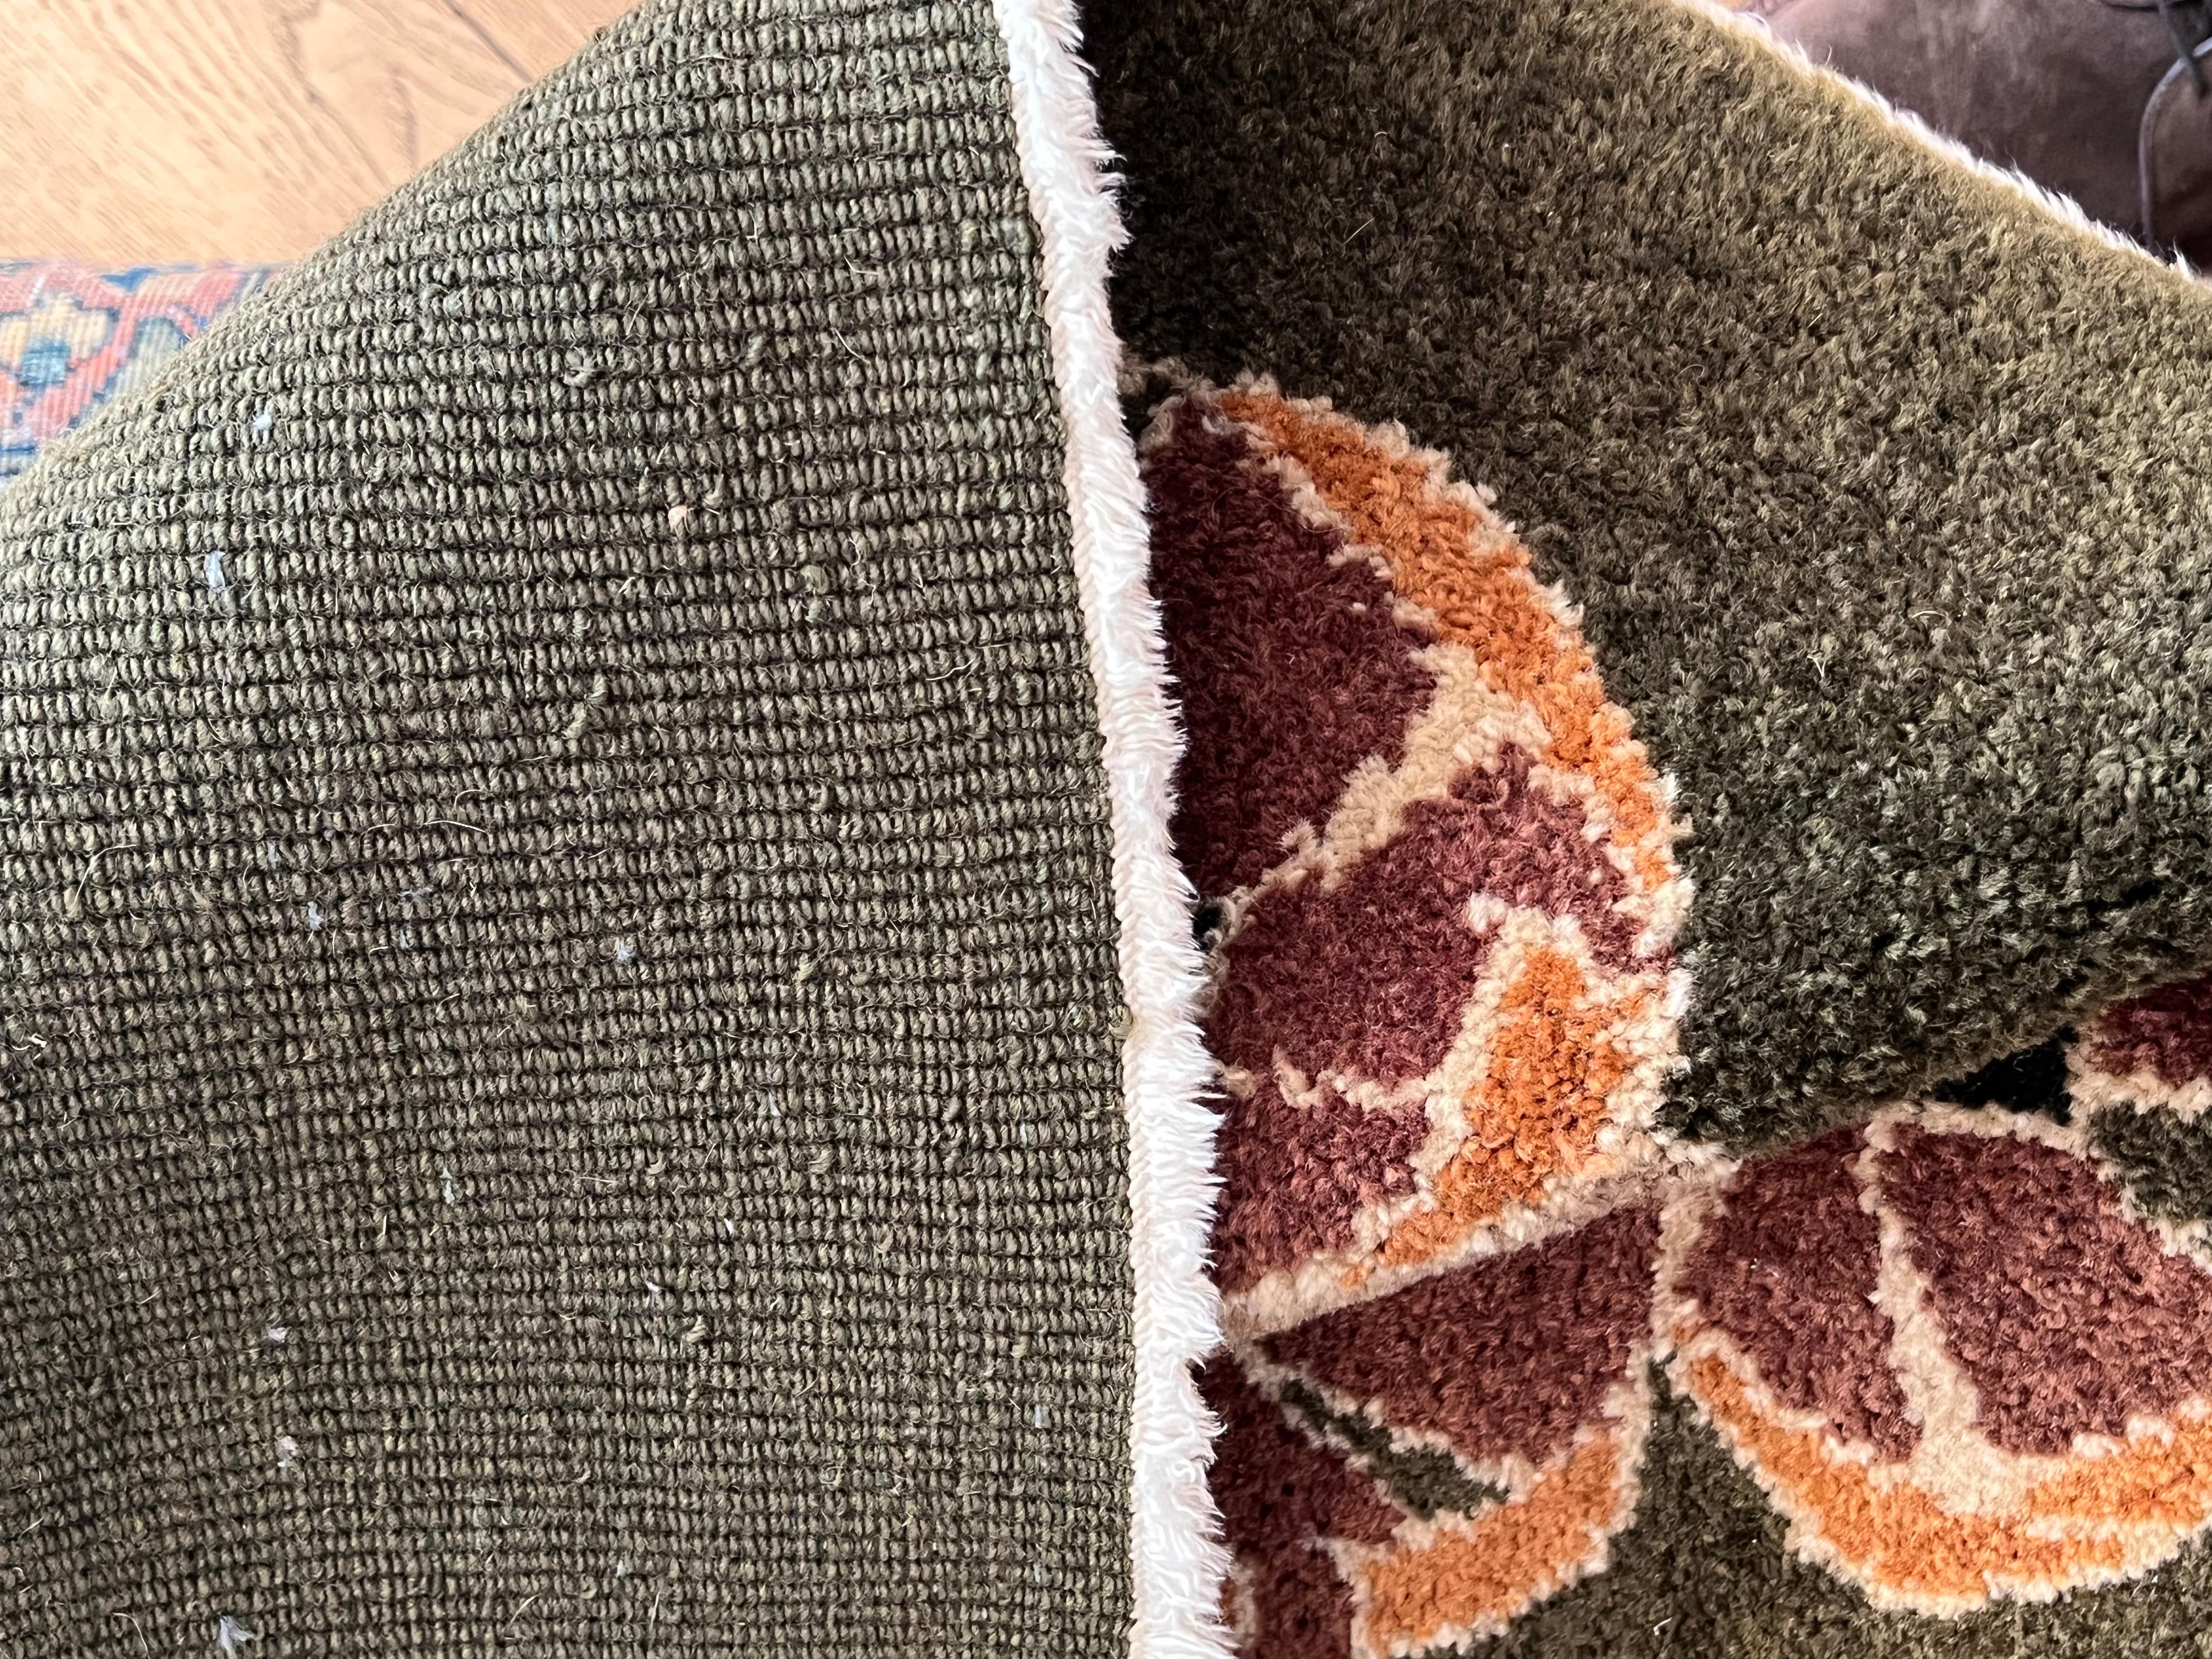 Irish carpets have a long and proud tradition. Their most famous carpets come from a city called Donegal in Ireland. Over the years Donegal Carpets has become a trademark of handmade wool carpets and the famous Celtic designs have decreed its